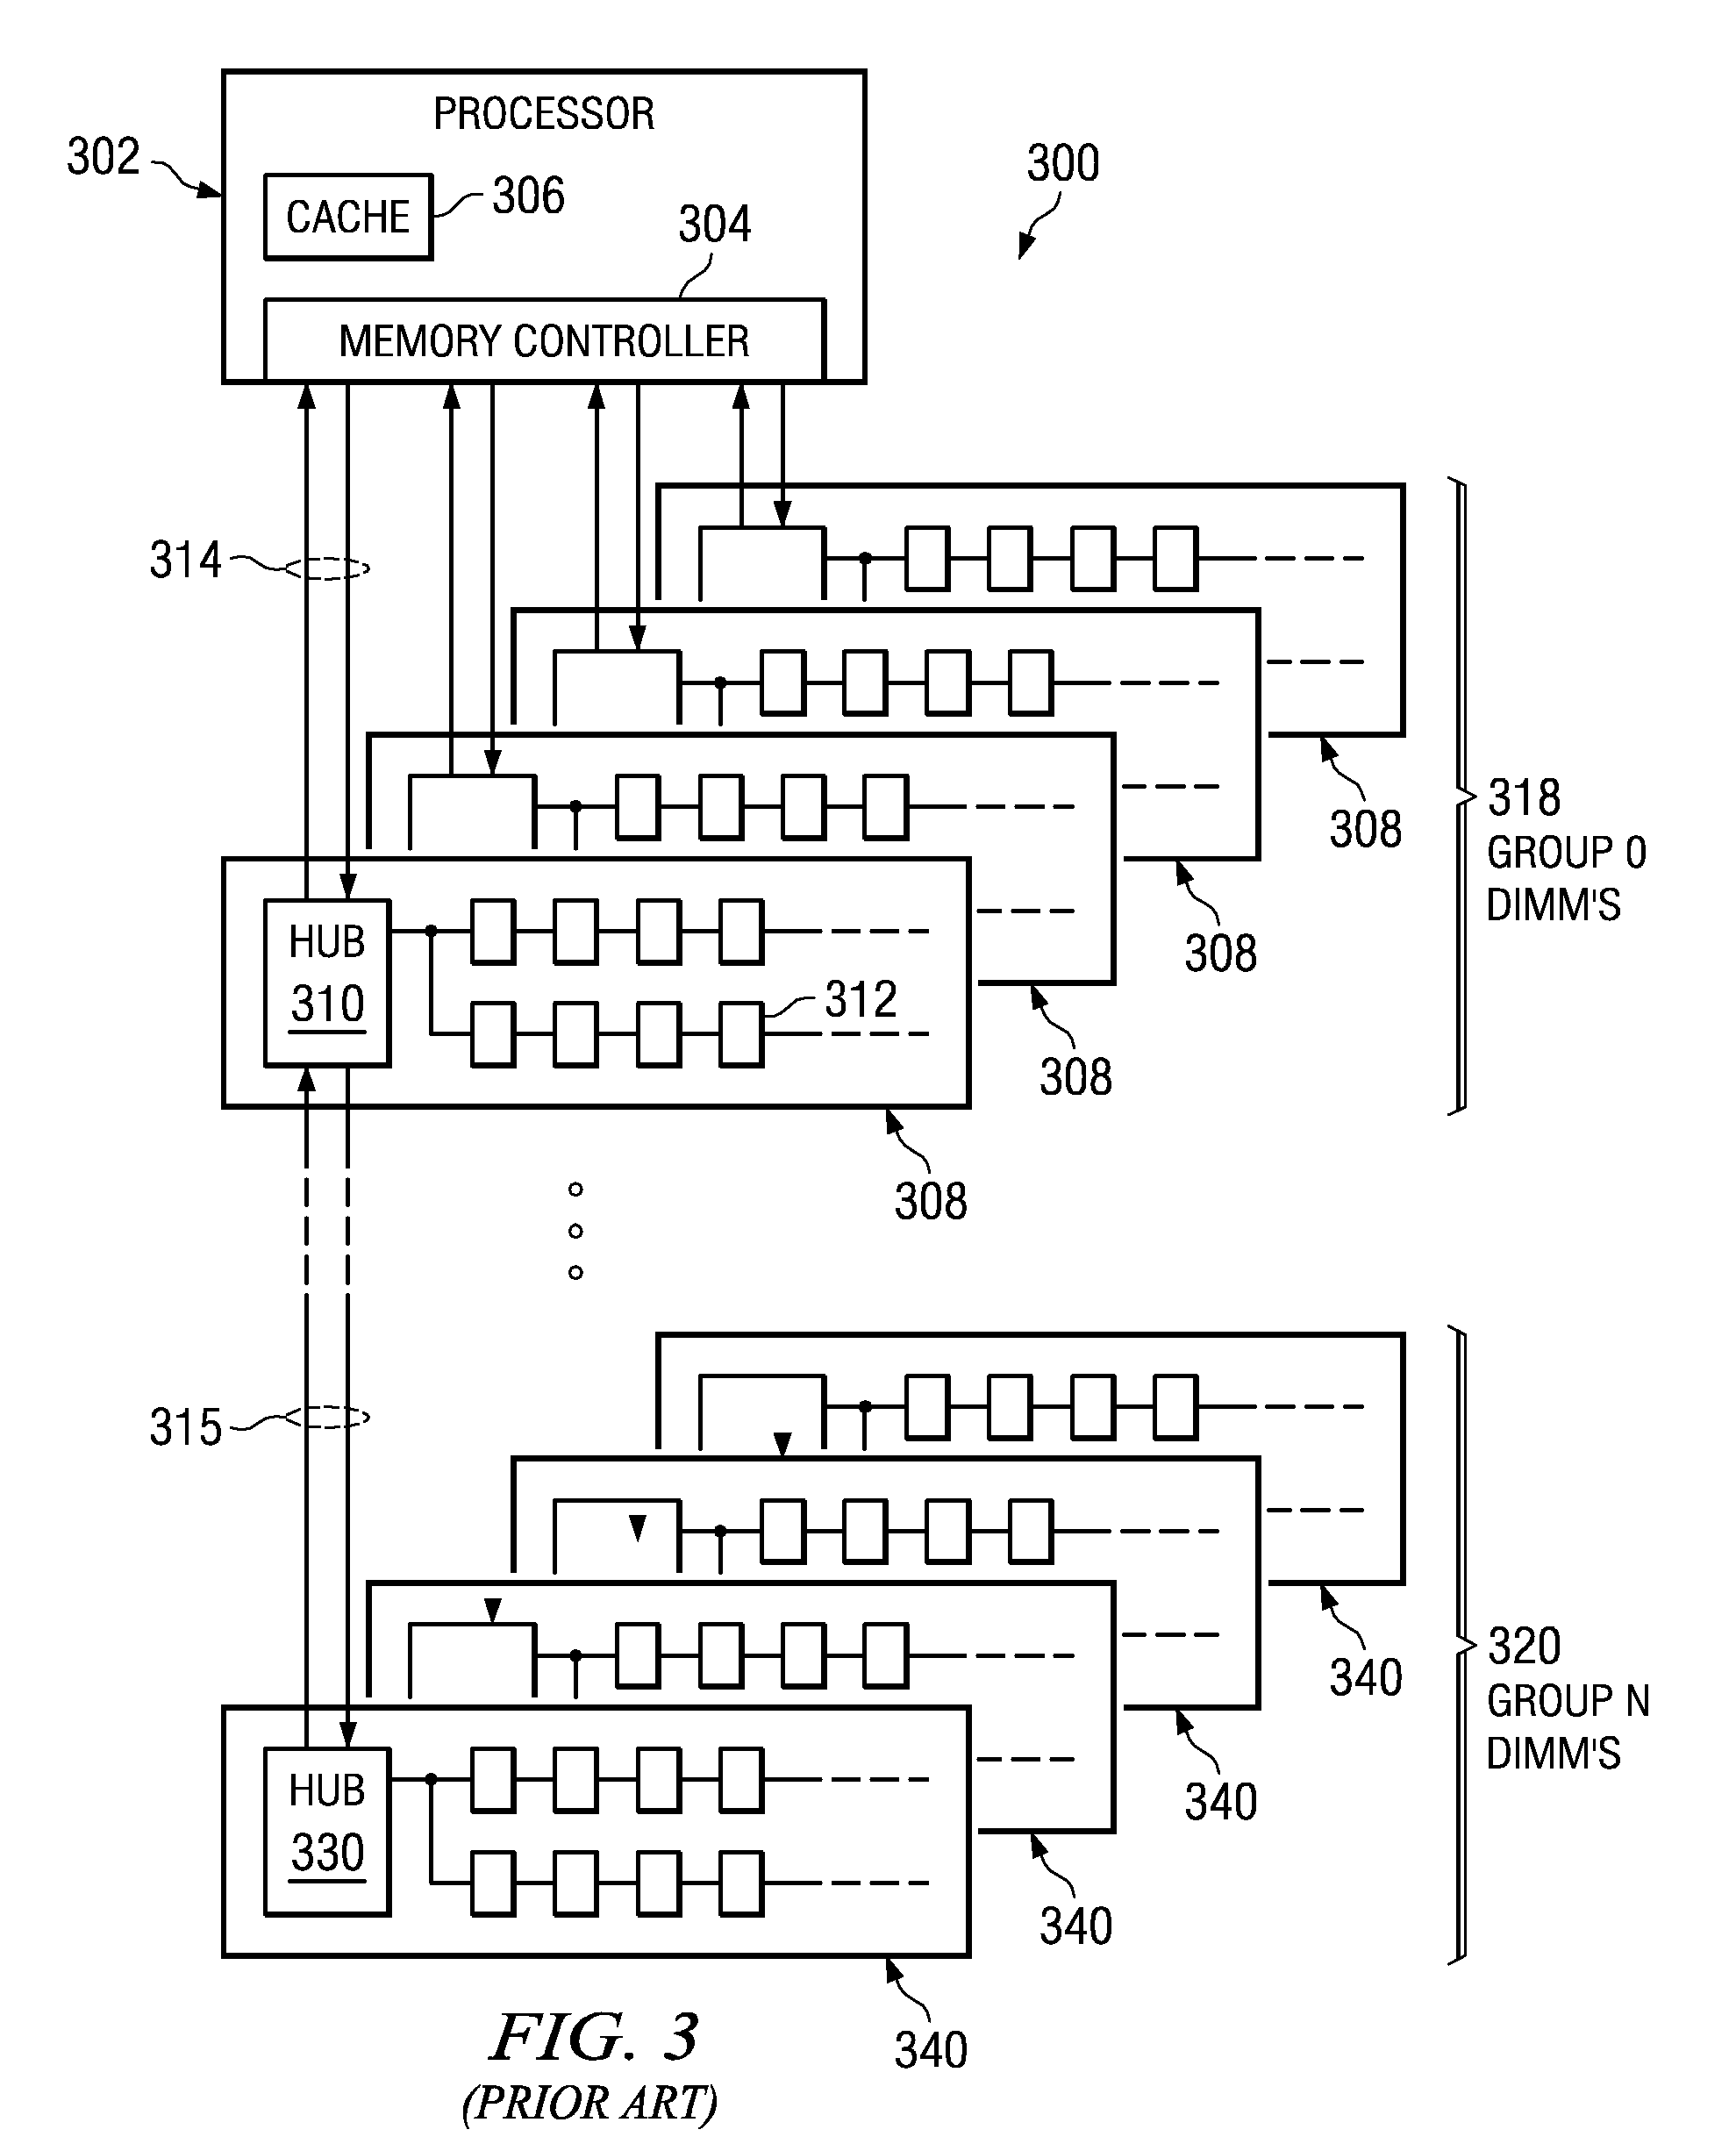 System for supporting partial cache line write operations to a memory module to reduce write data traffic on a memory channel